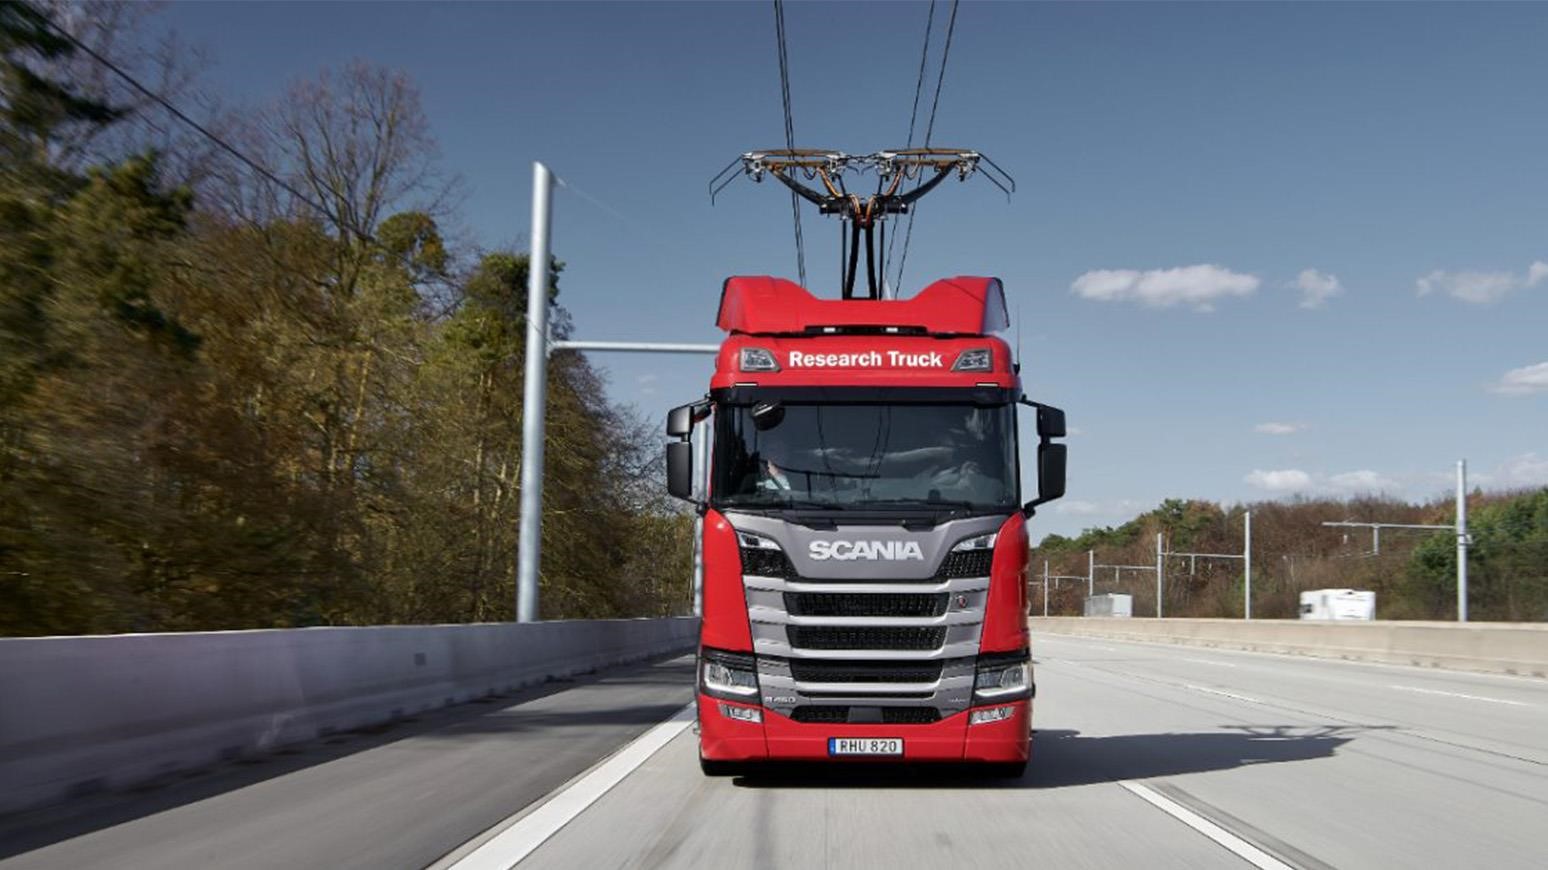 Scania Partnering To Test Feasibility Of Long-Haul Electrified Trucks Powered By Overhead Wires